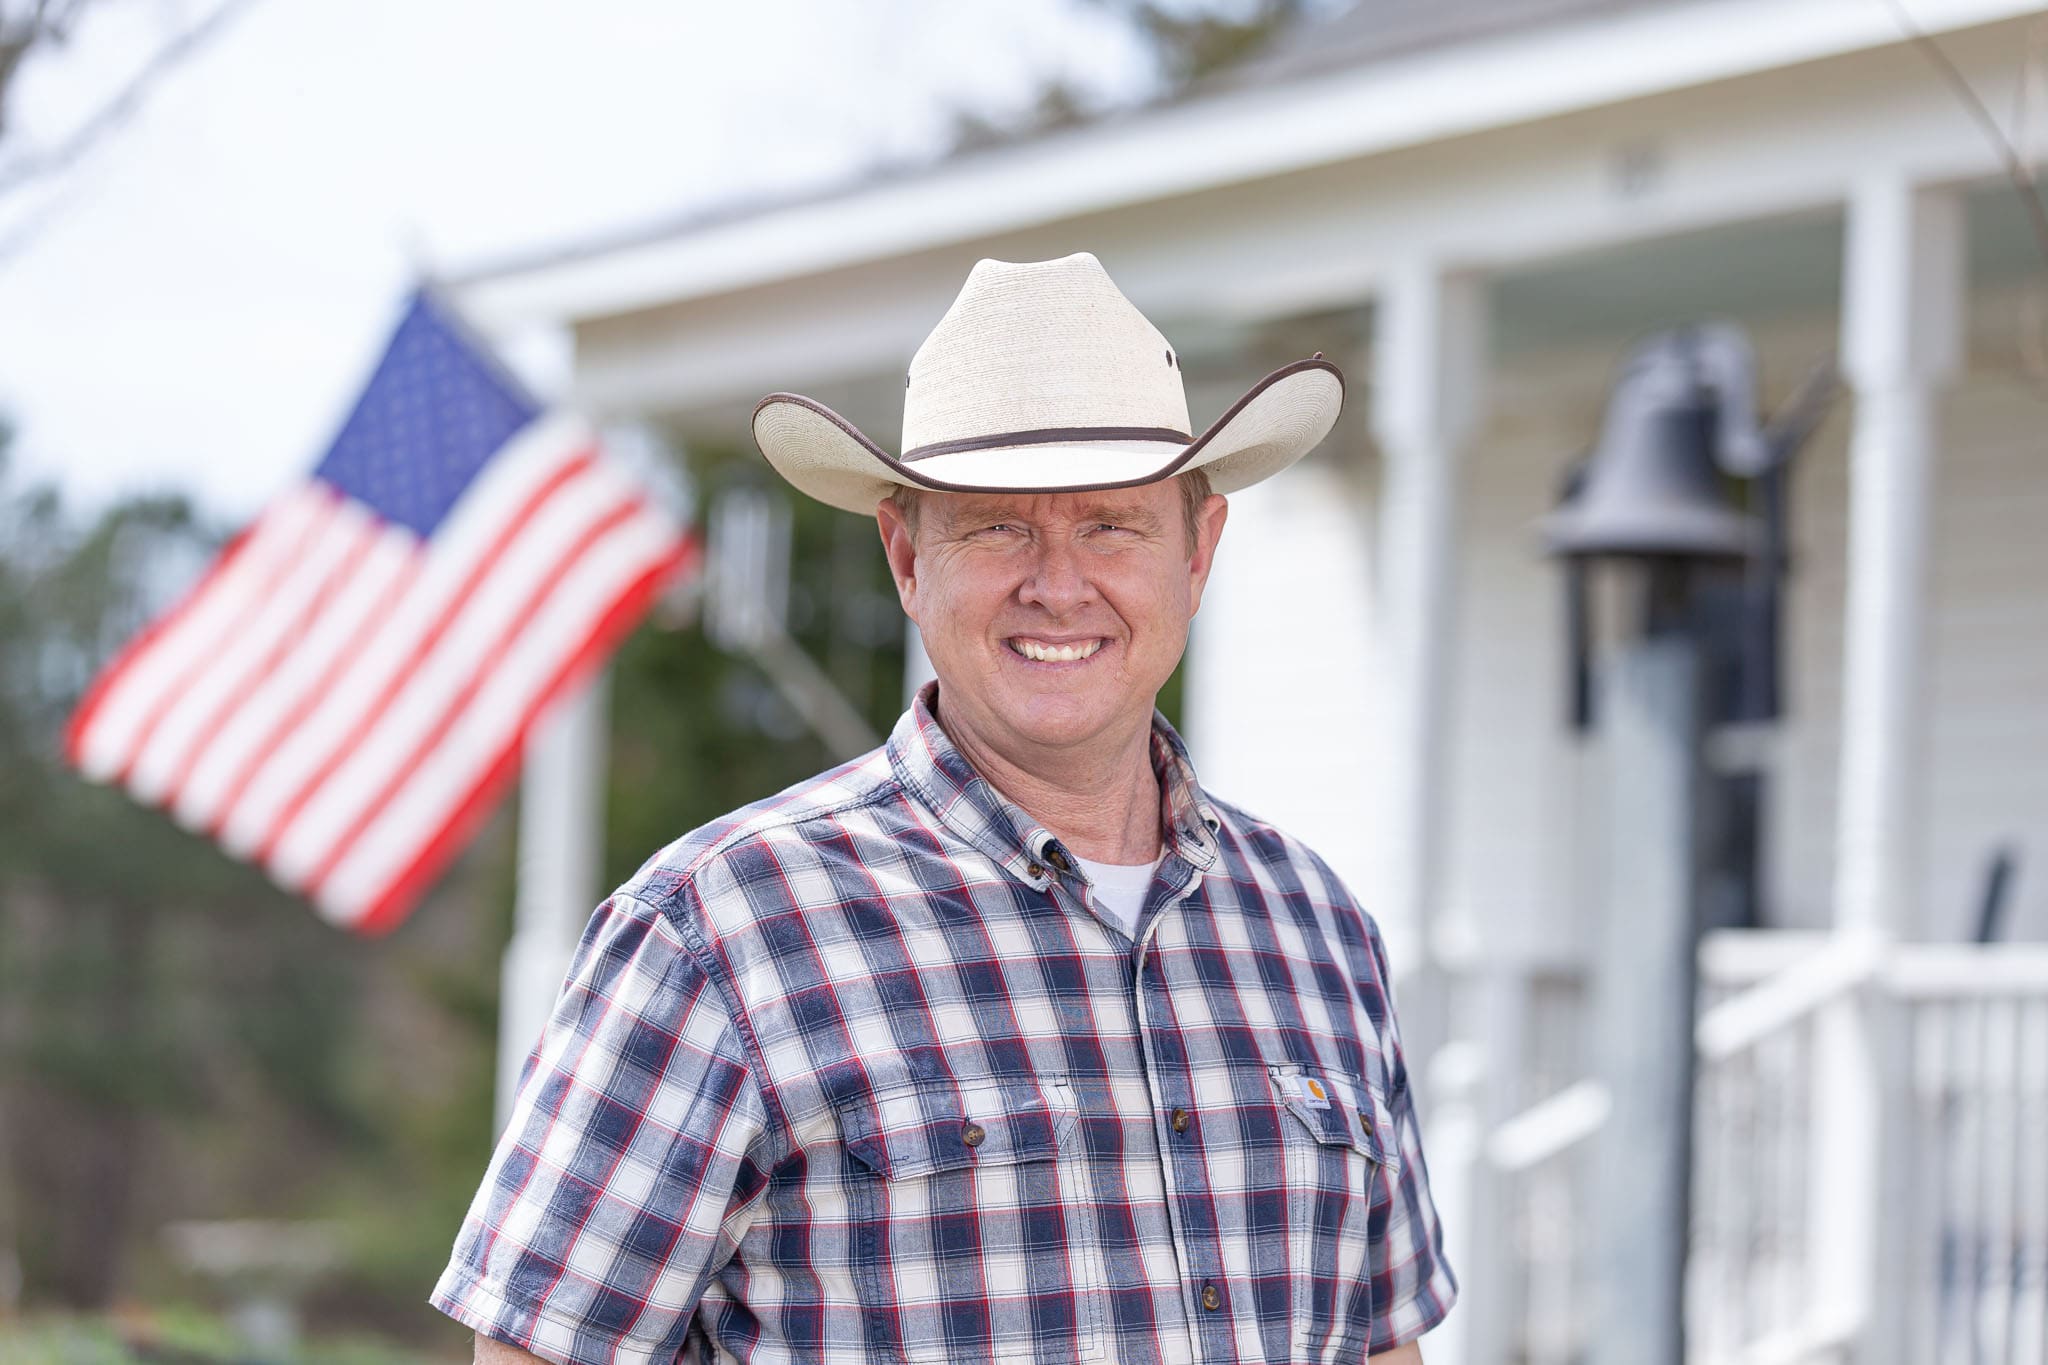 Georgia-State-Representative-and-helicopter-pilot-David-Jenkins-wearing-a-cowboy-hat-standing-in-front-of-his-farmhouse-with-an-American-flag-in-the-background.